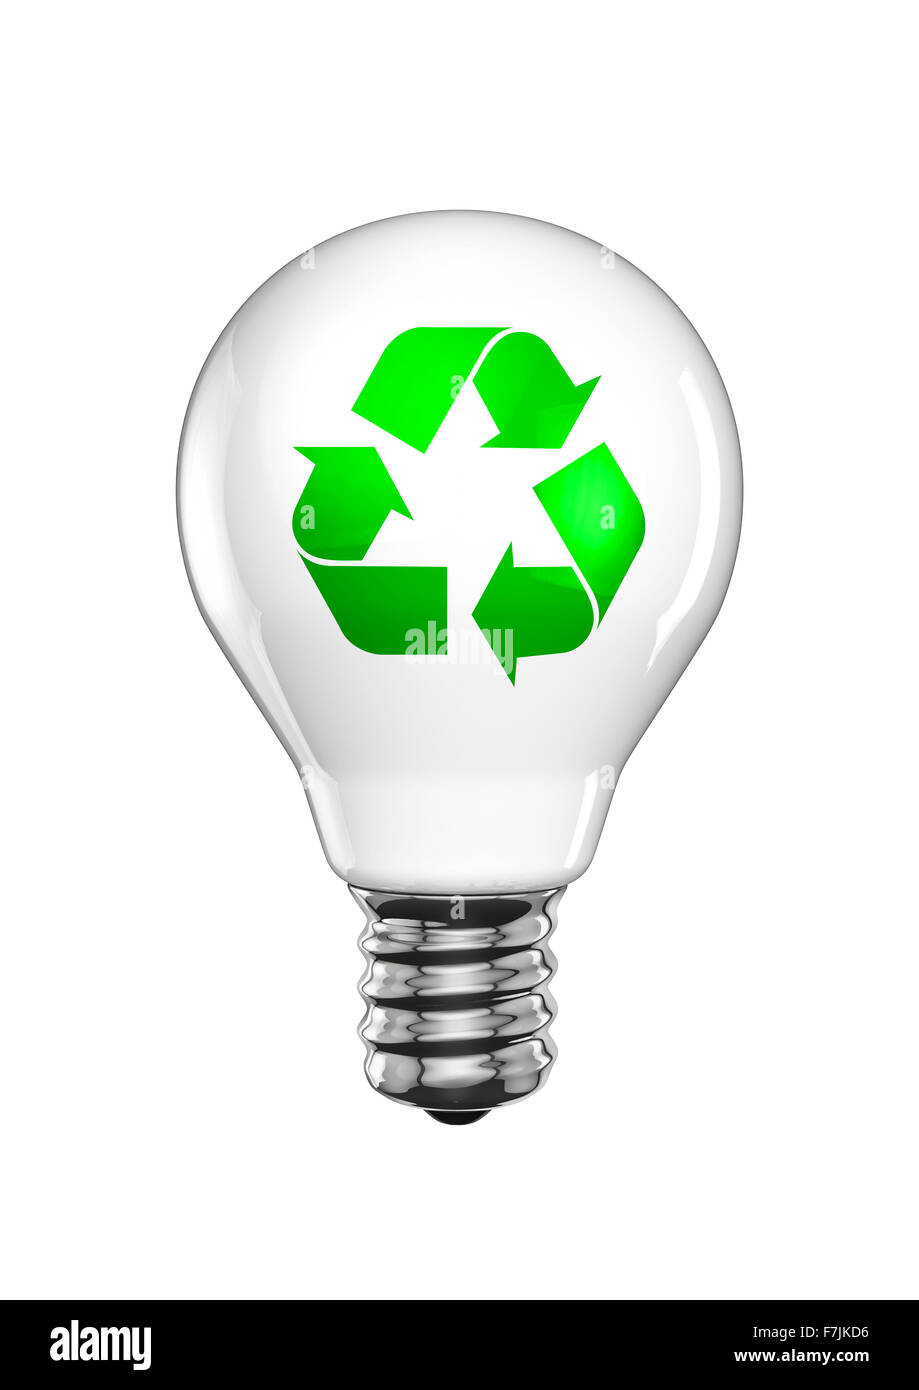 Recycle light bulb / 3D render of light bulb with recycling symbol Stock  Photo - Alamy